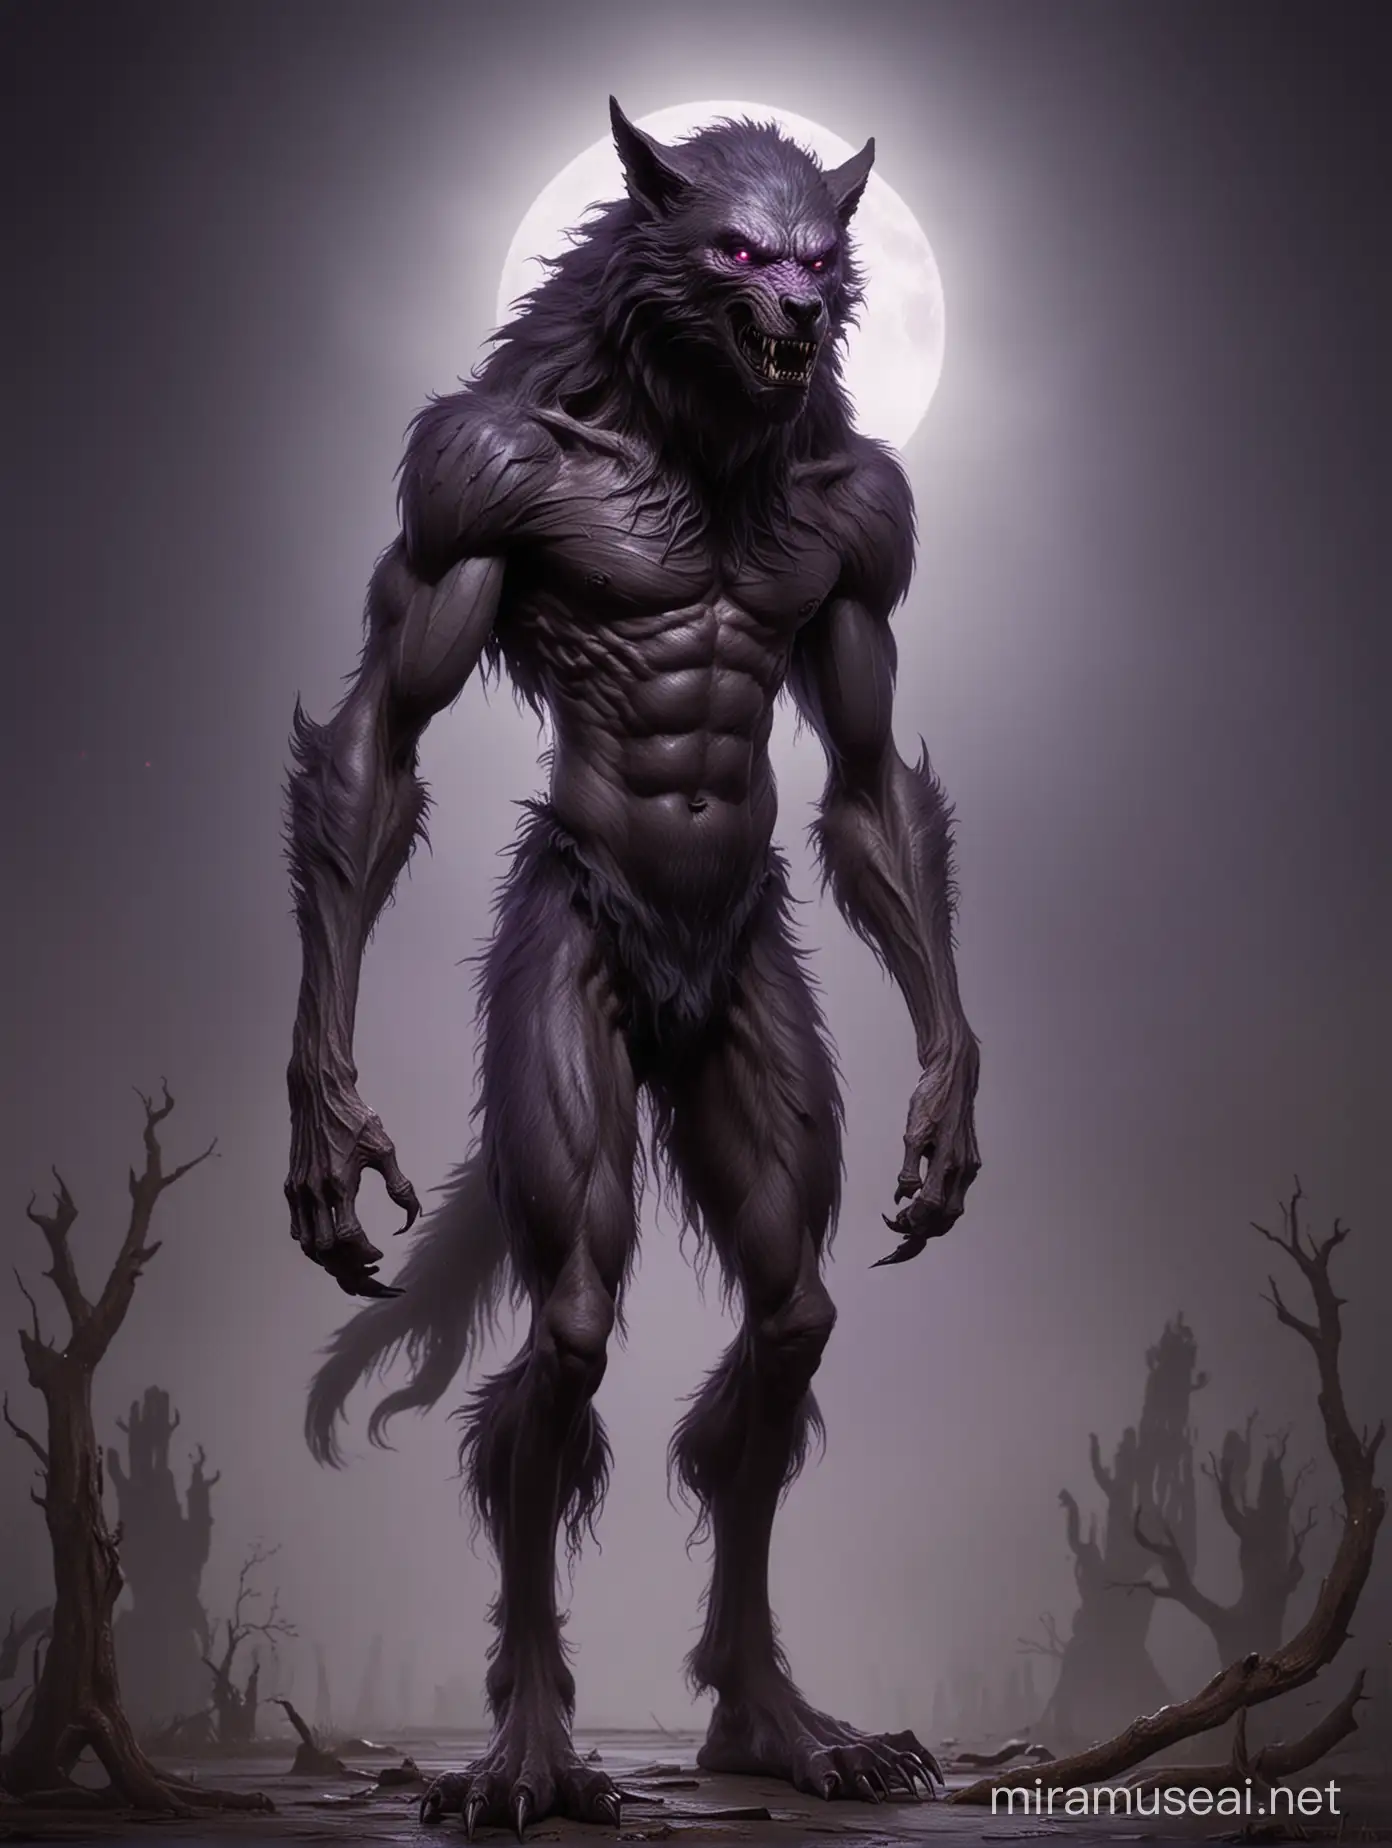 Majestic Werewolf Stands Tall with Enigmatic Violet Gaze